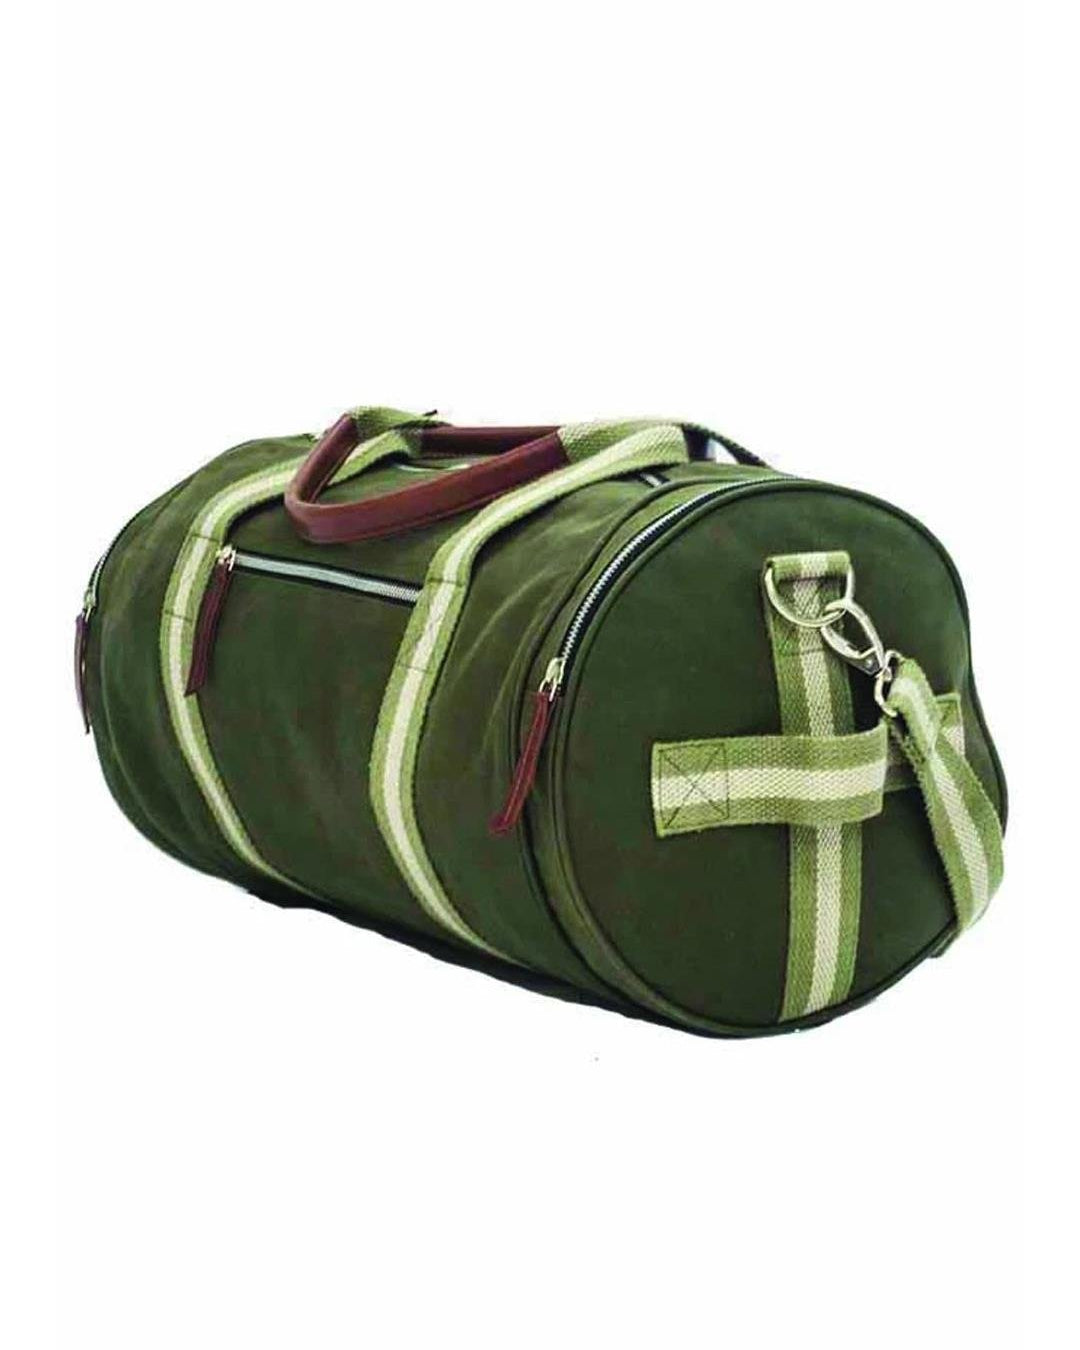 Folk Water Resistant Military Green Duffle Bag - Our Better Planet